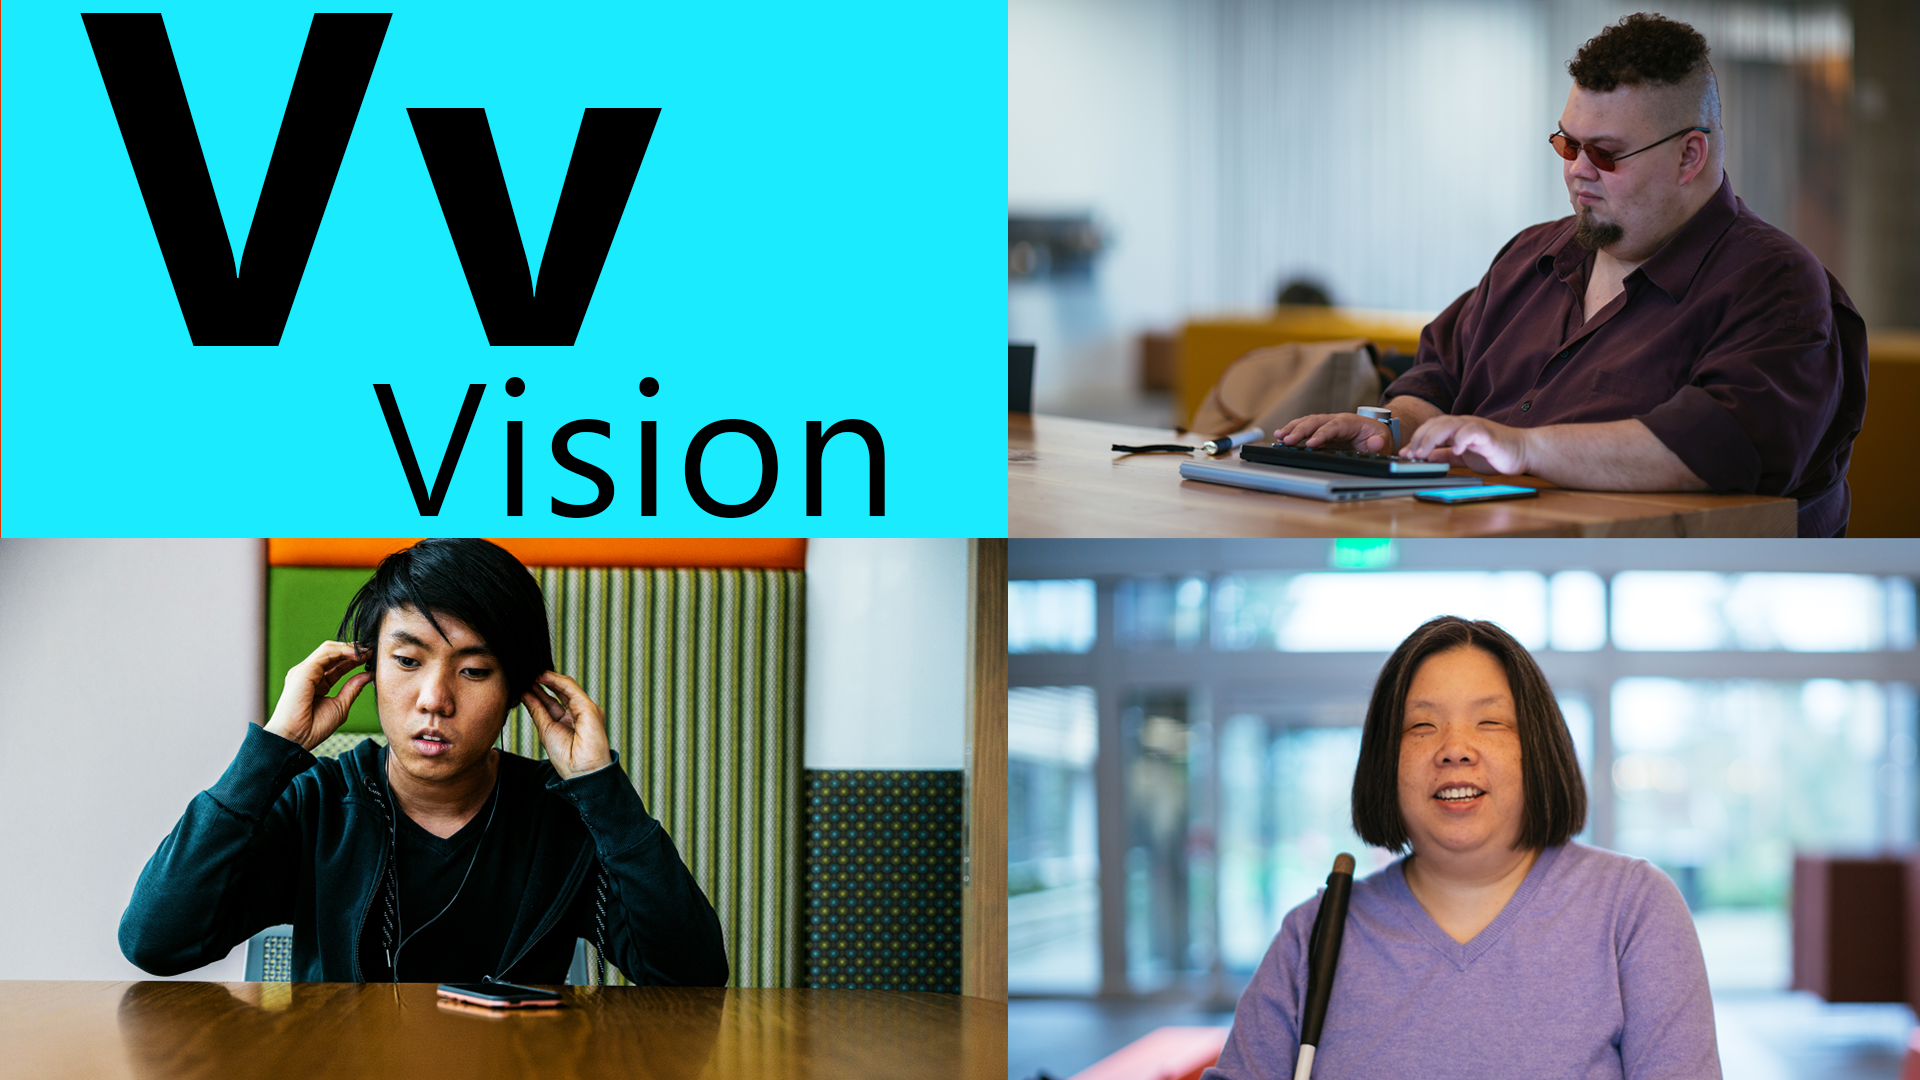 Top right: V is for vision. Cory Joseph, a man who is blind, types on a braille keyboard while also working through a mobile phone. Bottom left: A tech worker with visual impairment uses assistive technology while visiting the Microsoft office in Singapore. Bottom right: Anne Taylor, a woman who is blind, works on a Surface device with a braille keyboard sitting on the side. 